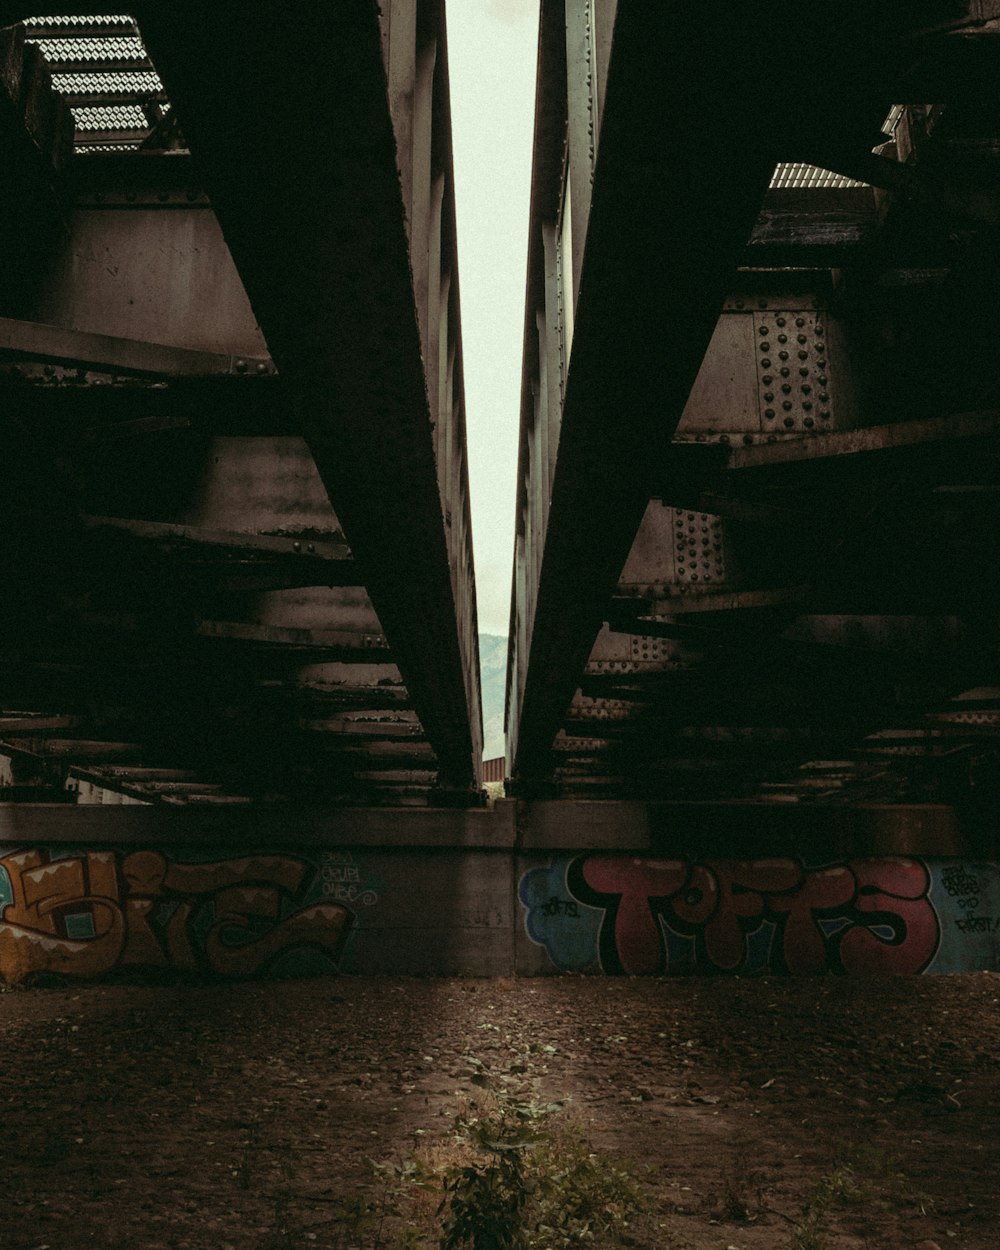 a view of the underside of a bridge with graffiti on it